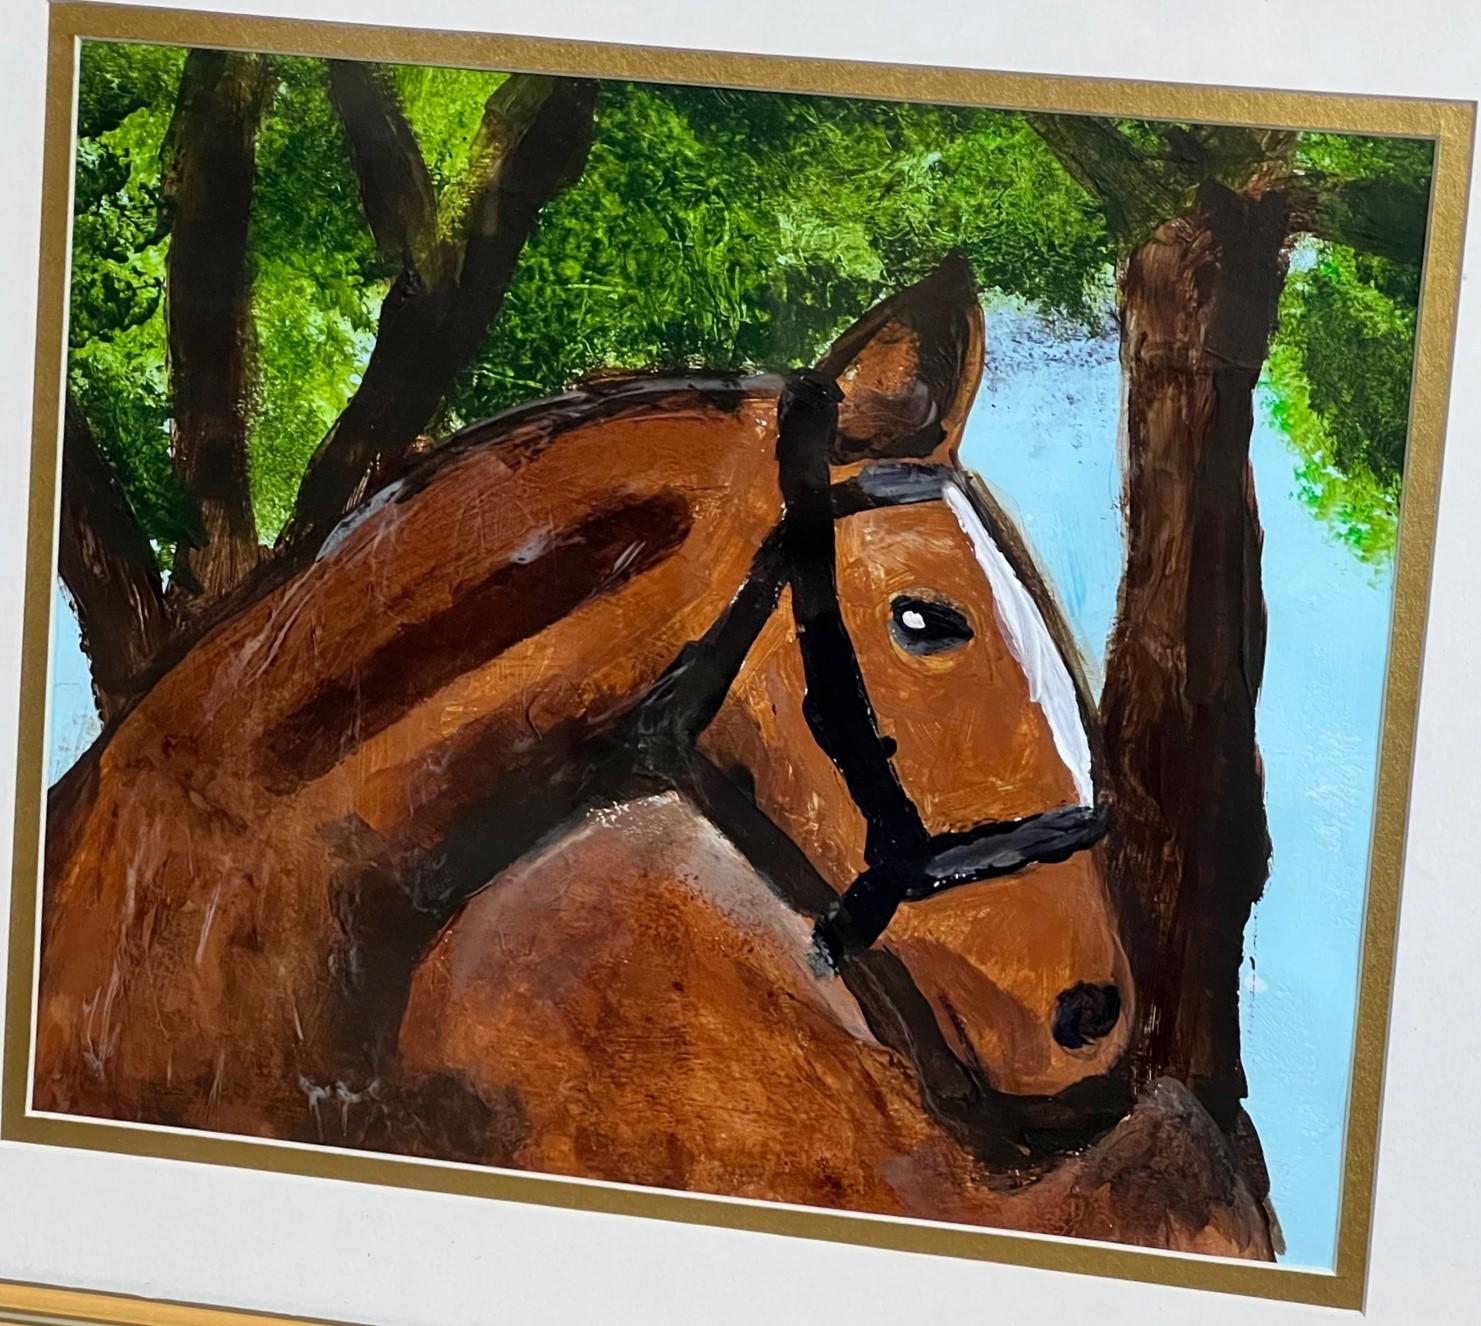 A small and engaging contemporary painting of a chestnut horse in a pastoral setting. The colors in this unsigned painting are fresh and vibrant. The application of the paint adds a textural element to the work. The piece is matted and framed under